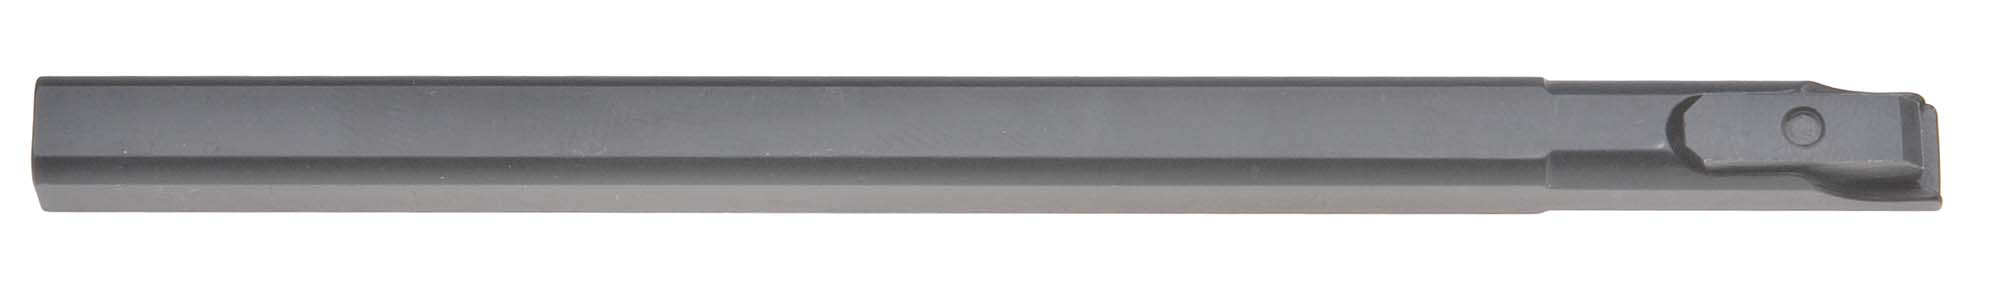 5/8" Mecabore Style Boring Bar